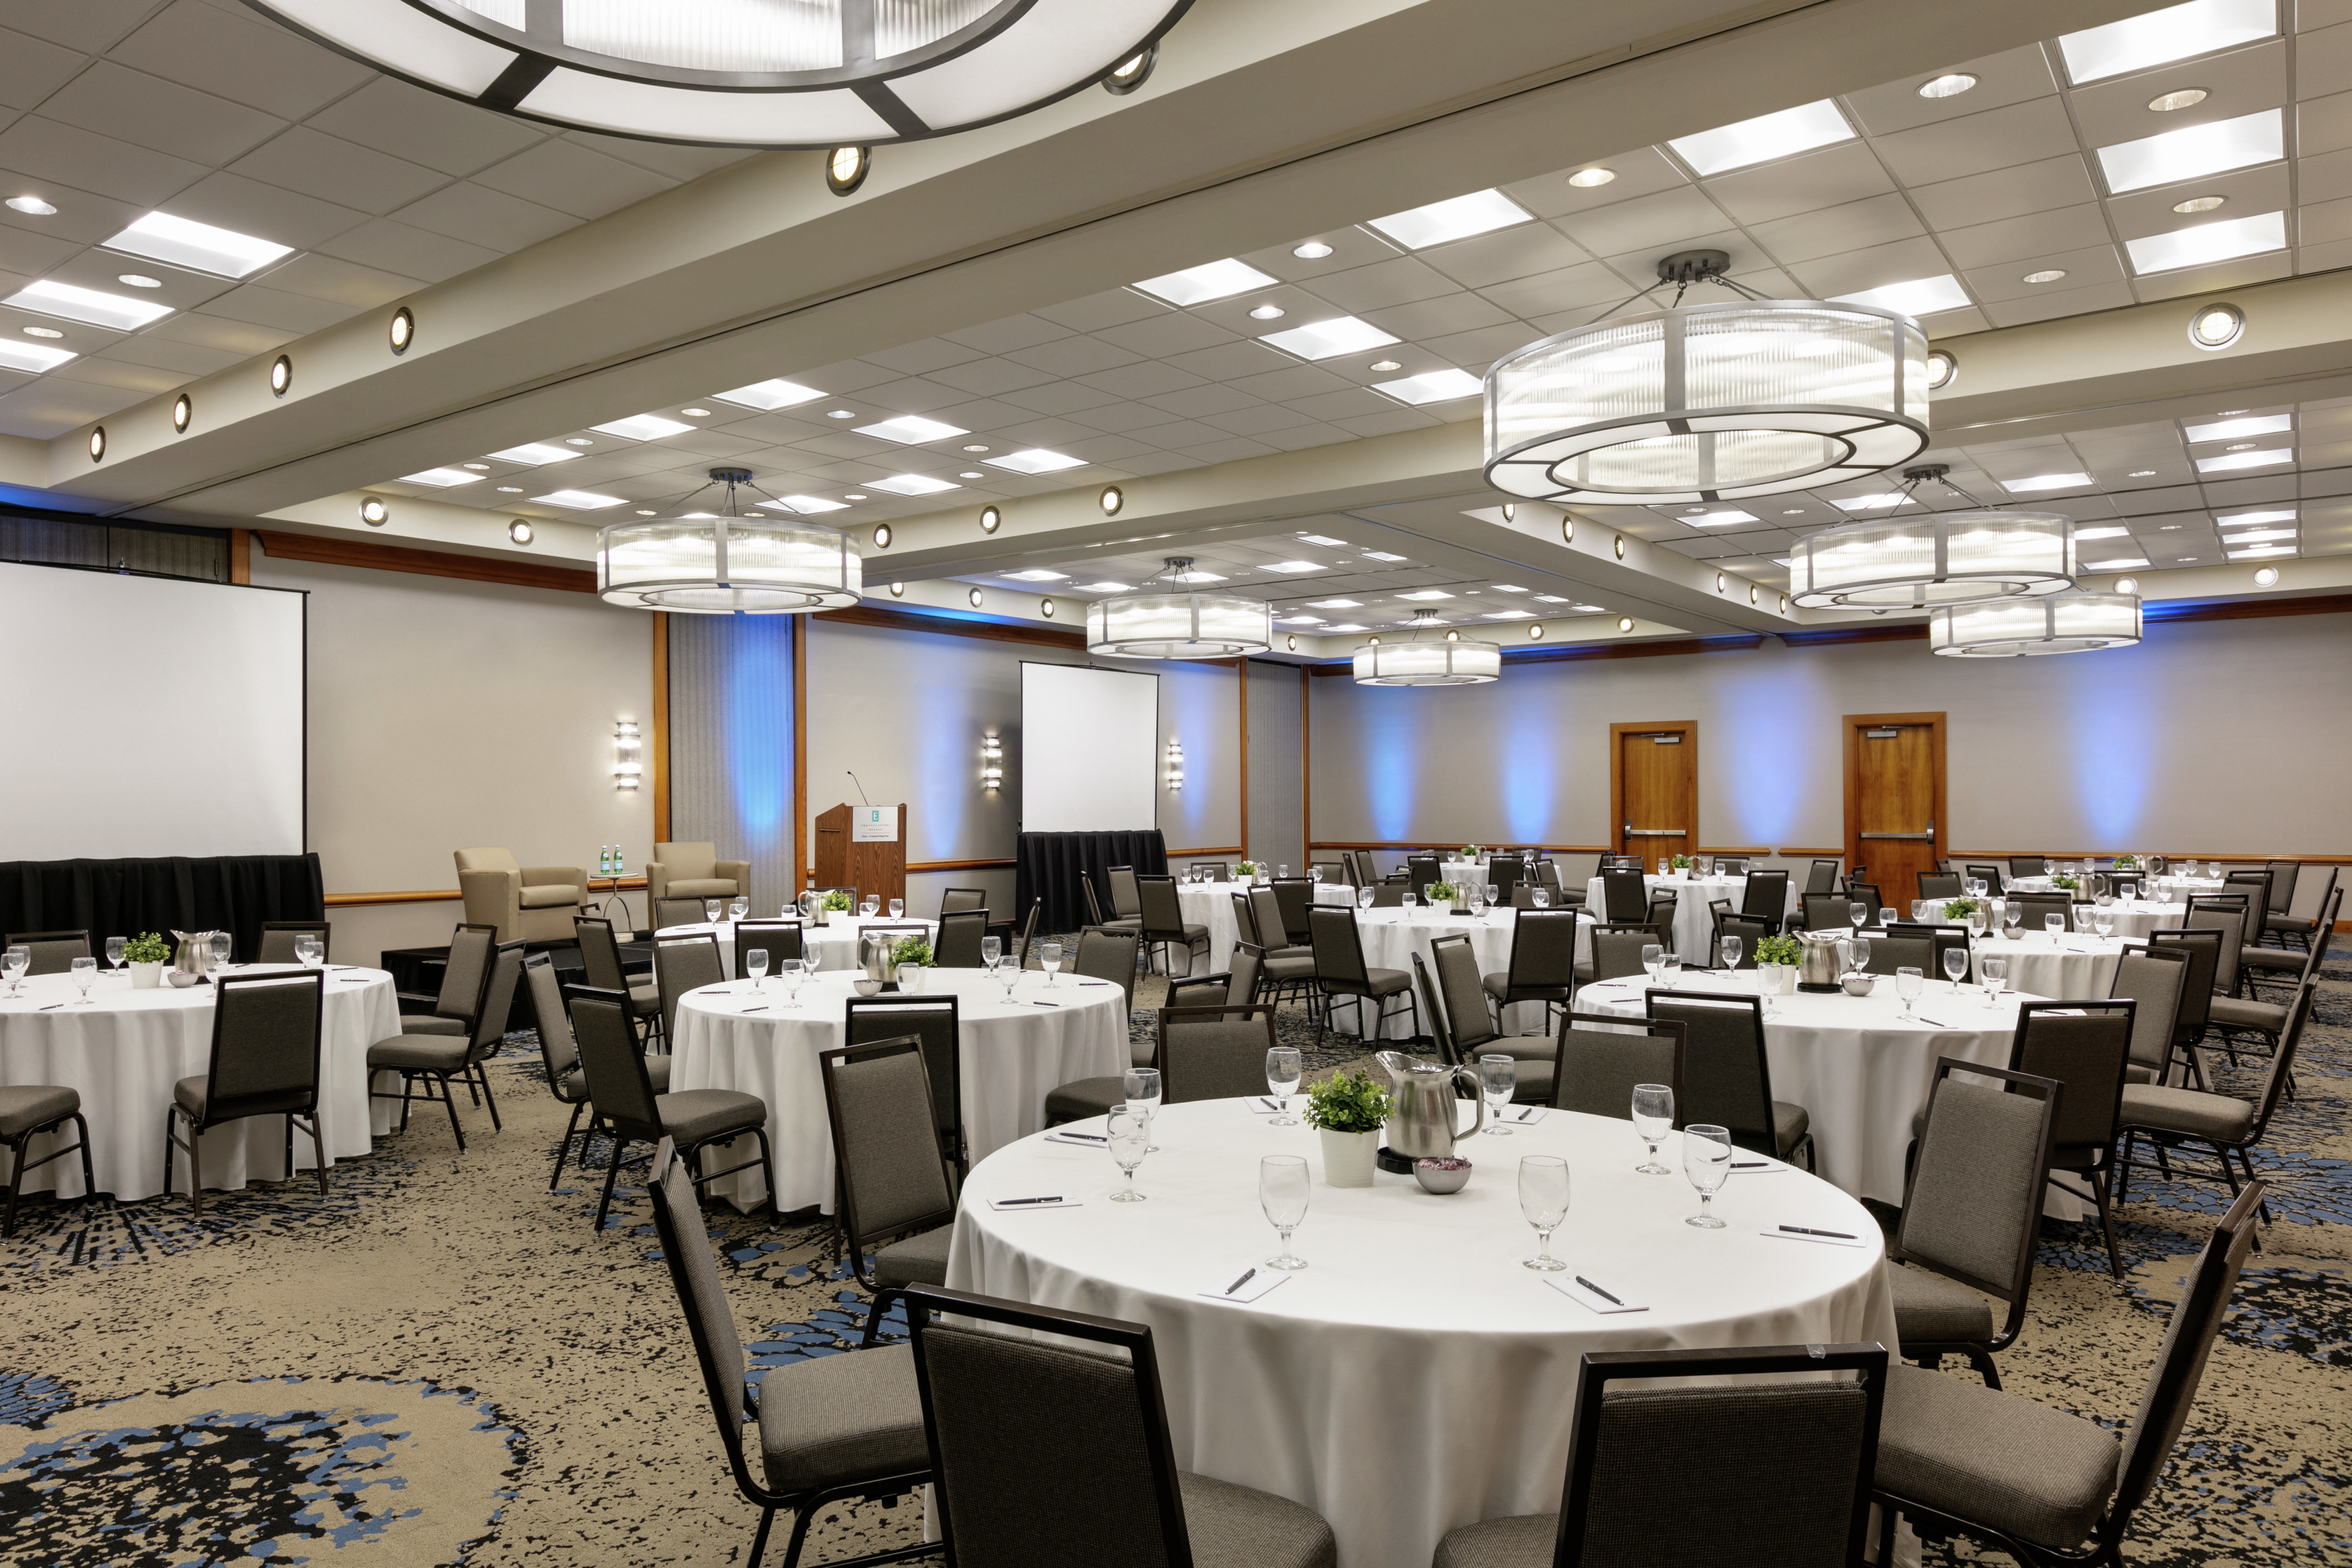 Spacious ballroom facility equipped with round tables with beautiful place settings, project screens, and stage.